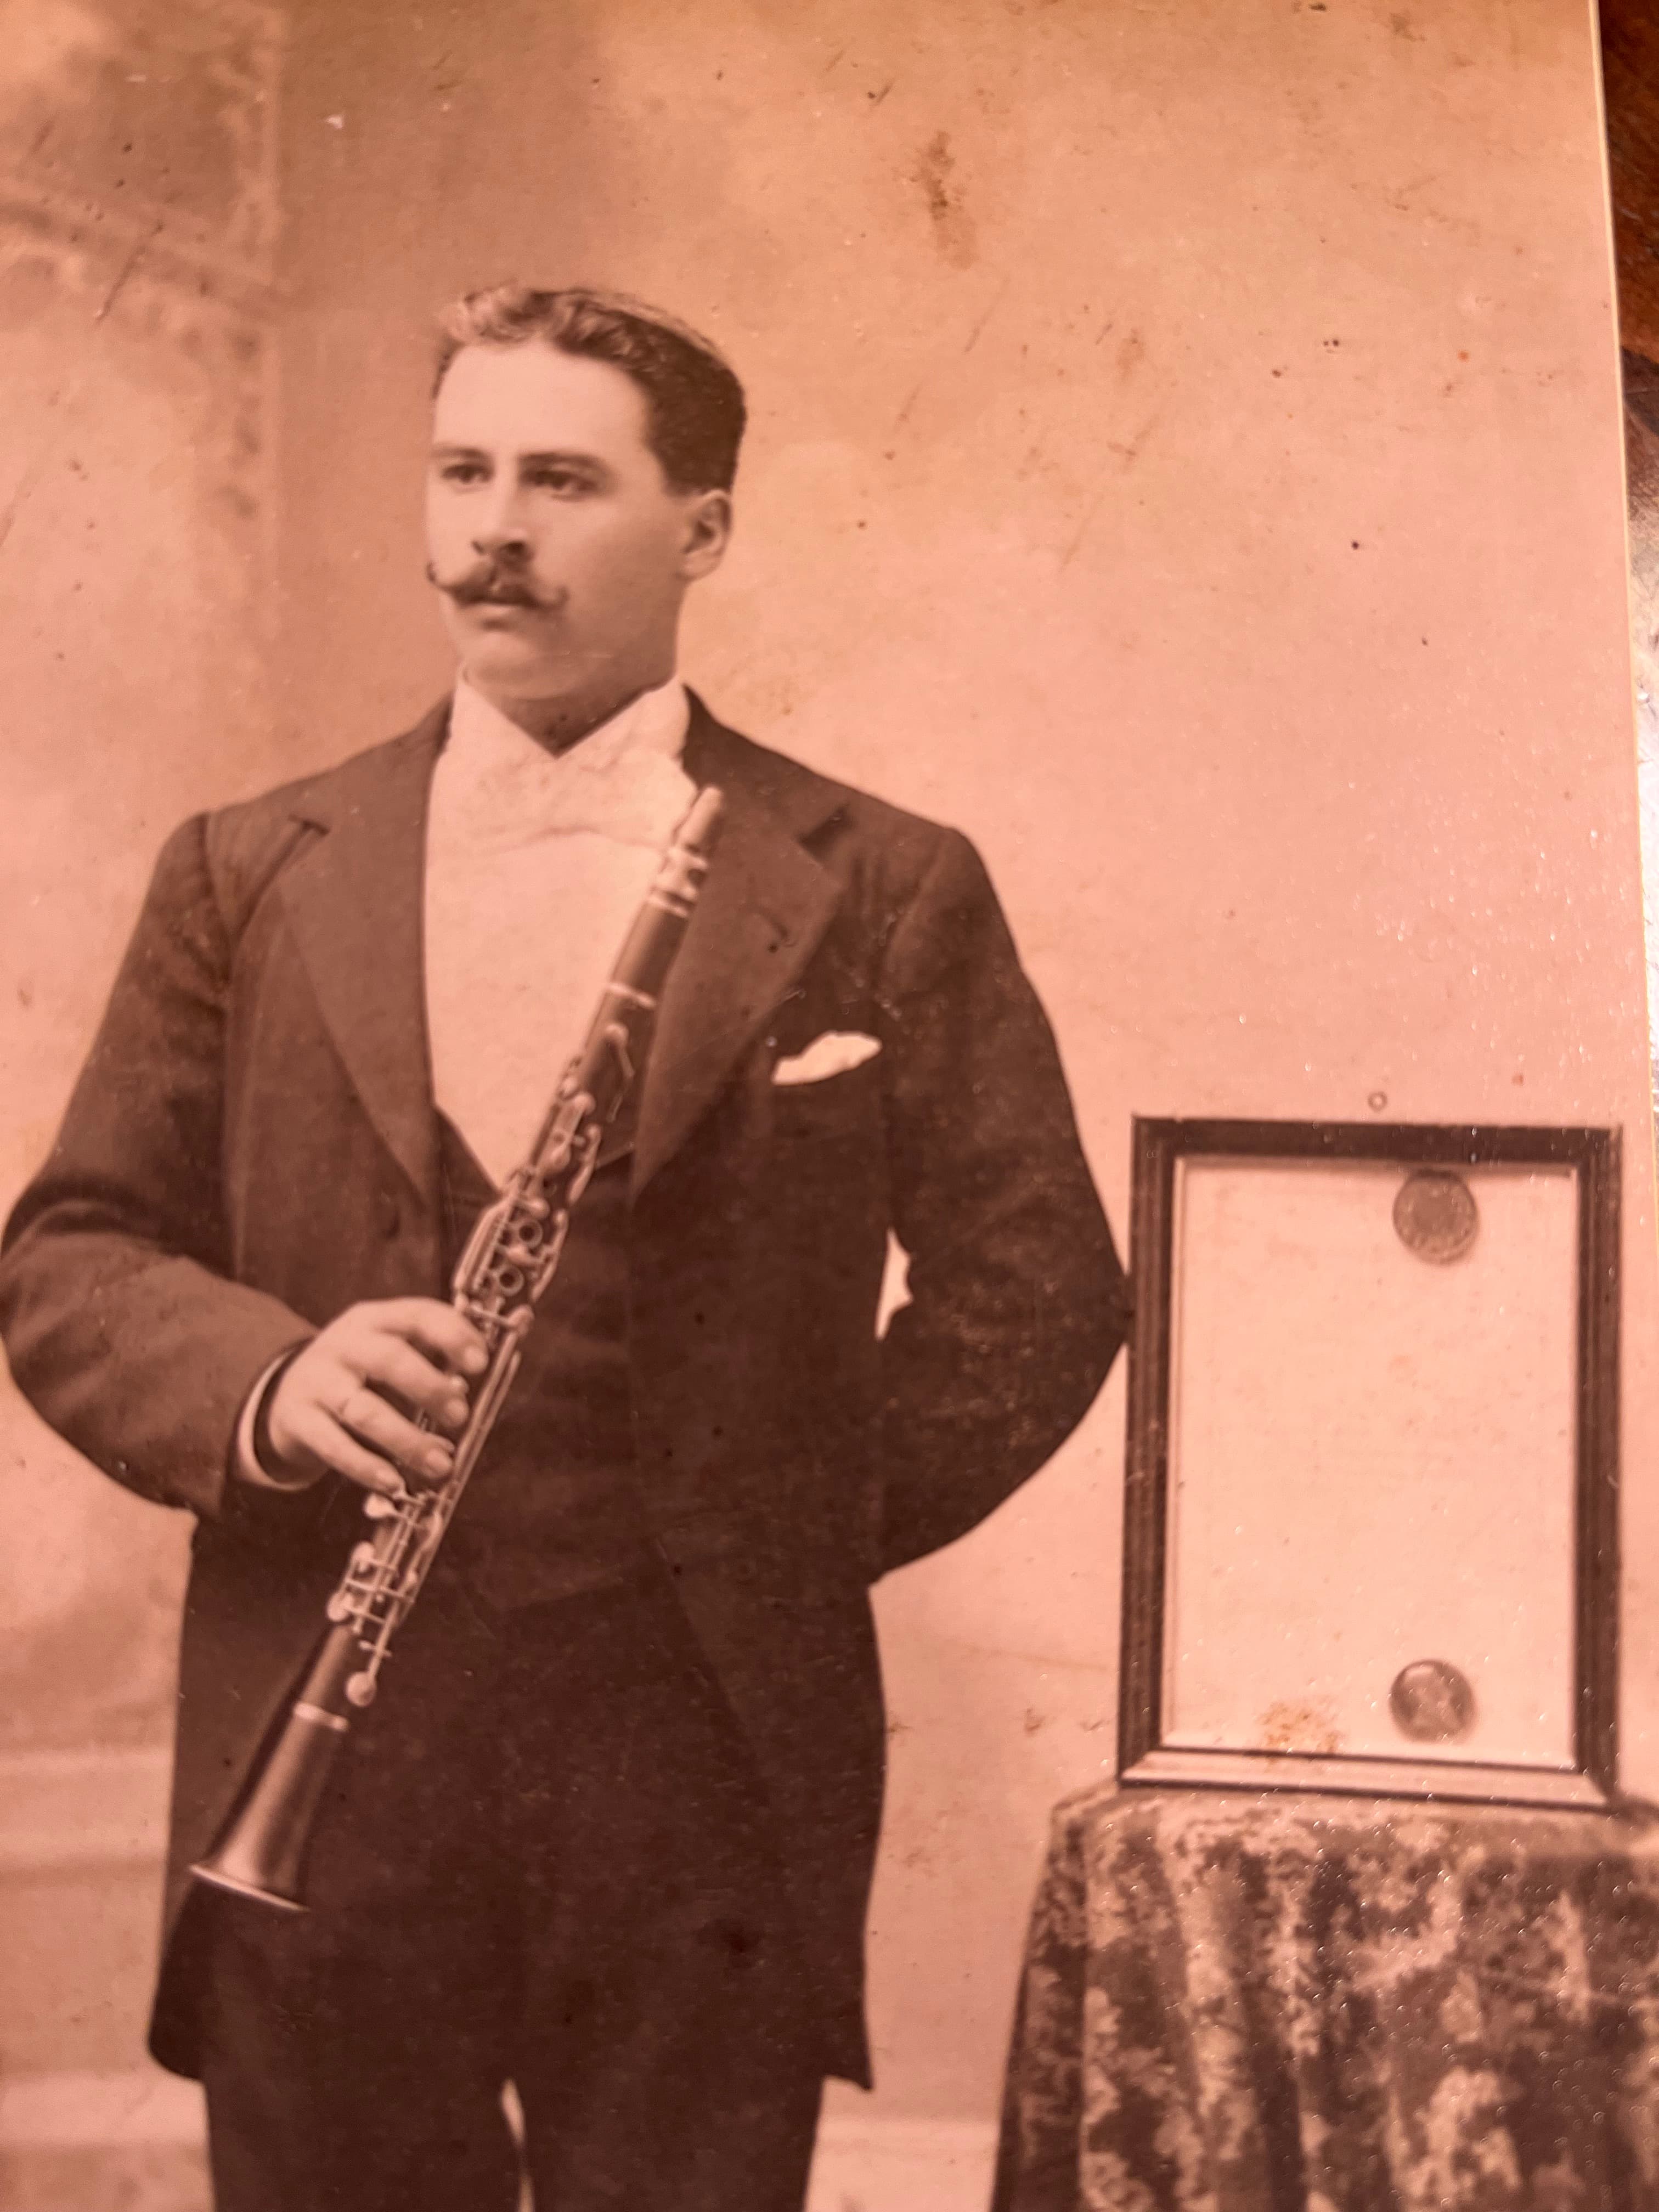 A sepia toned image of M.J. Heynen posing with a clarinet looking off to the side